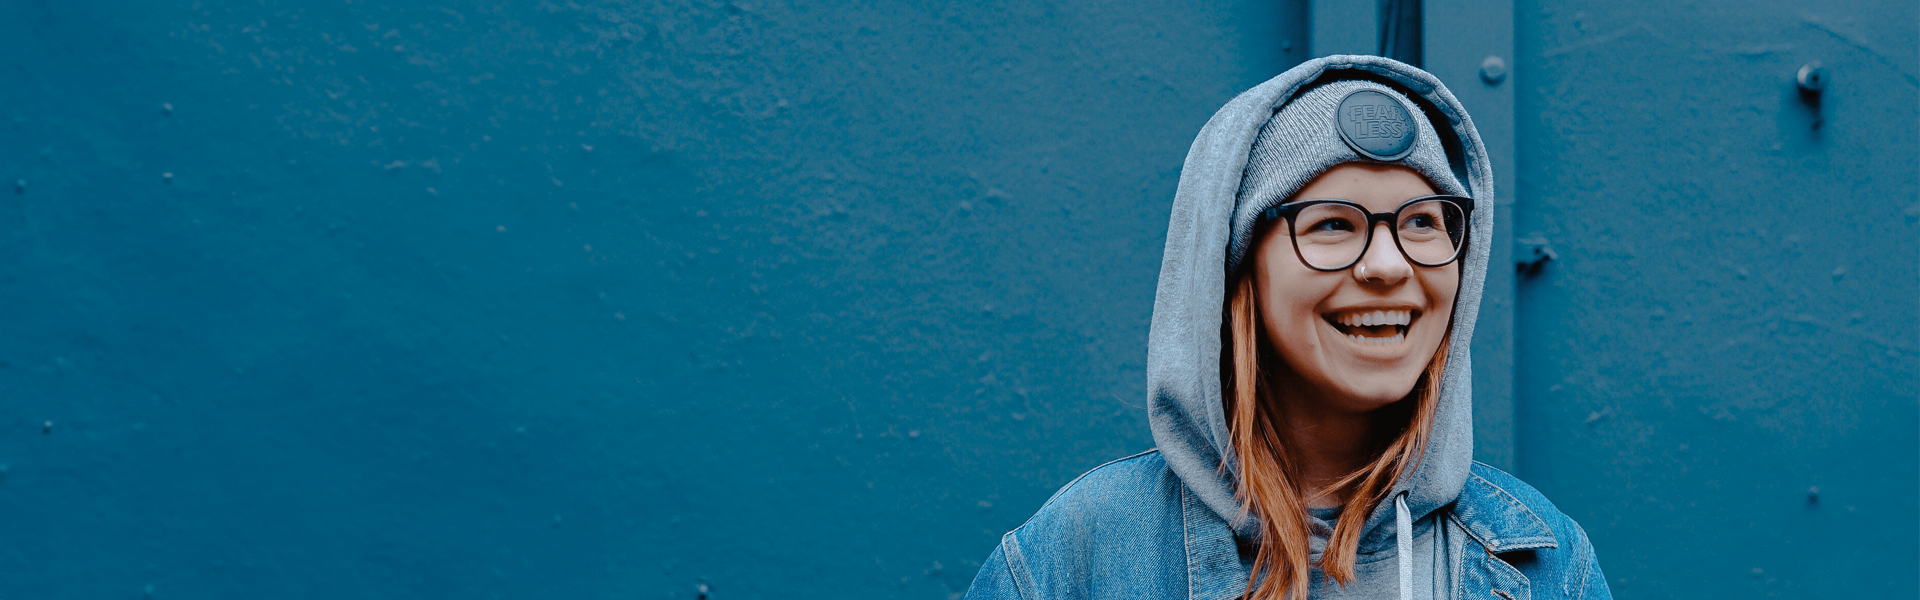 Young woman with a nose ring, wearing a hoodie and glasses in front of an industrial blue wall